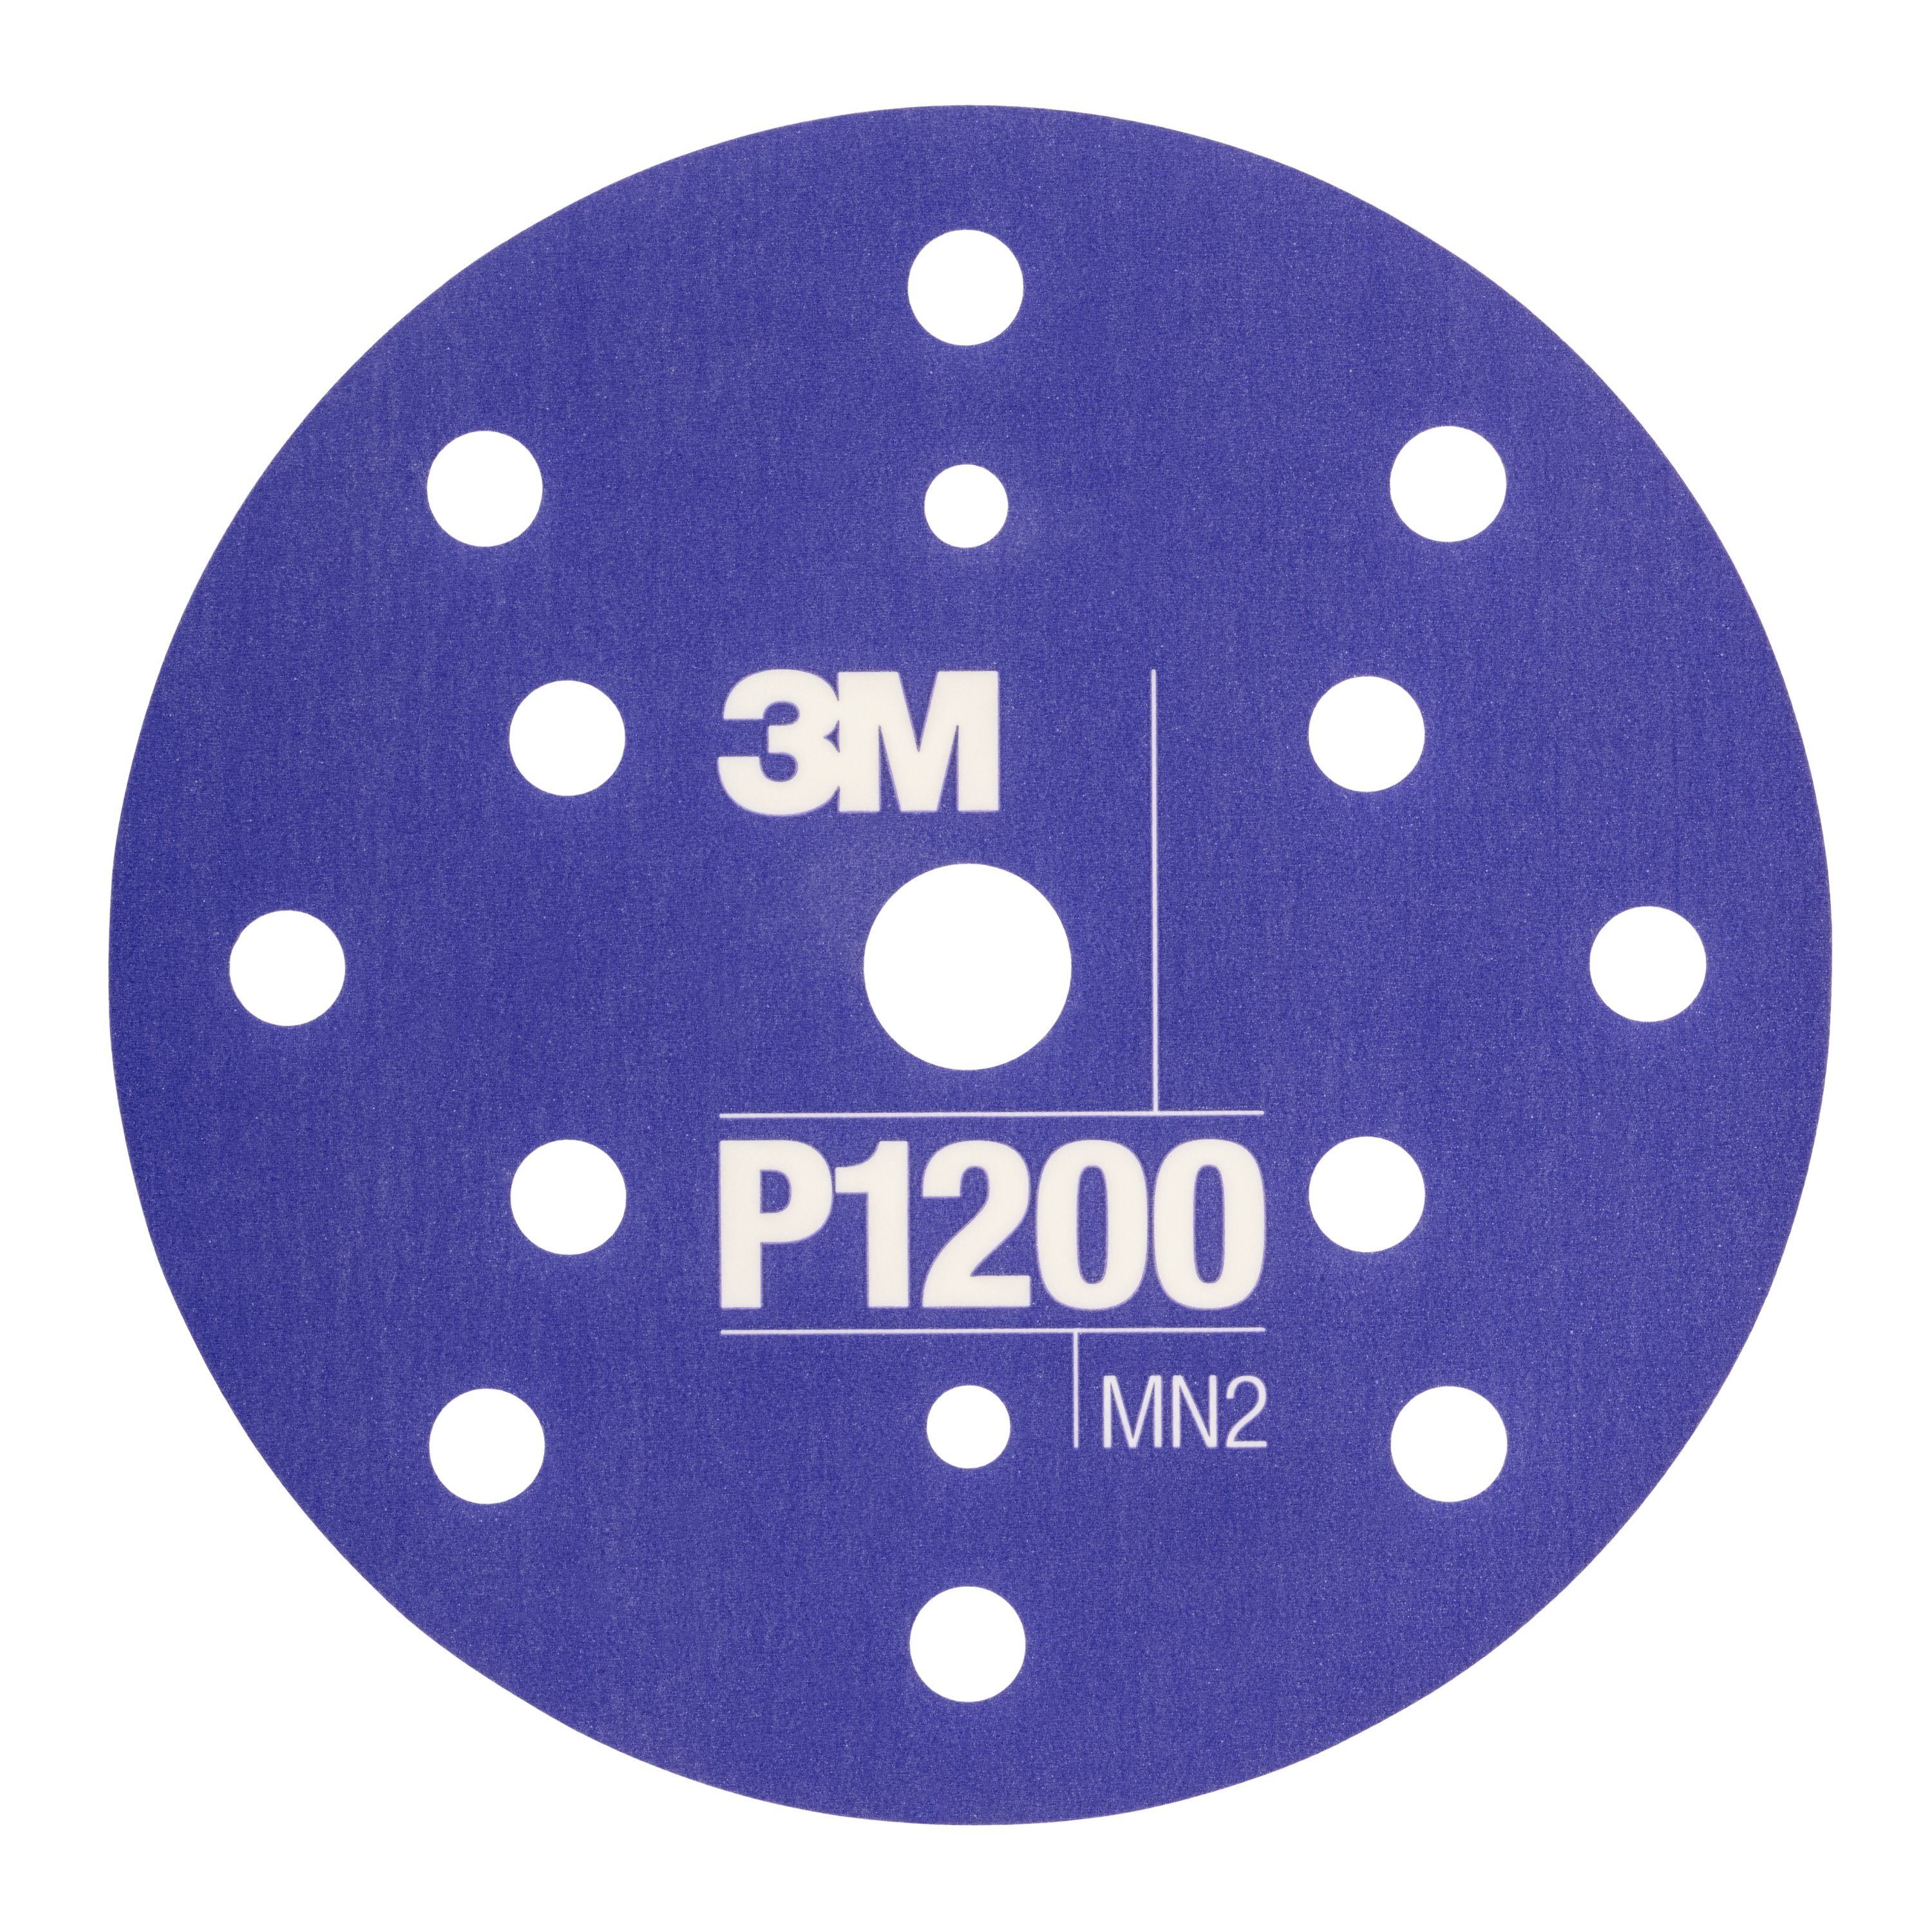 Our high performing 3M™ Flexible Abrasive Discs are available in a variety of grades for primer sanding, blending and paint finishing applications.